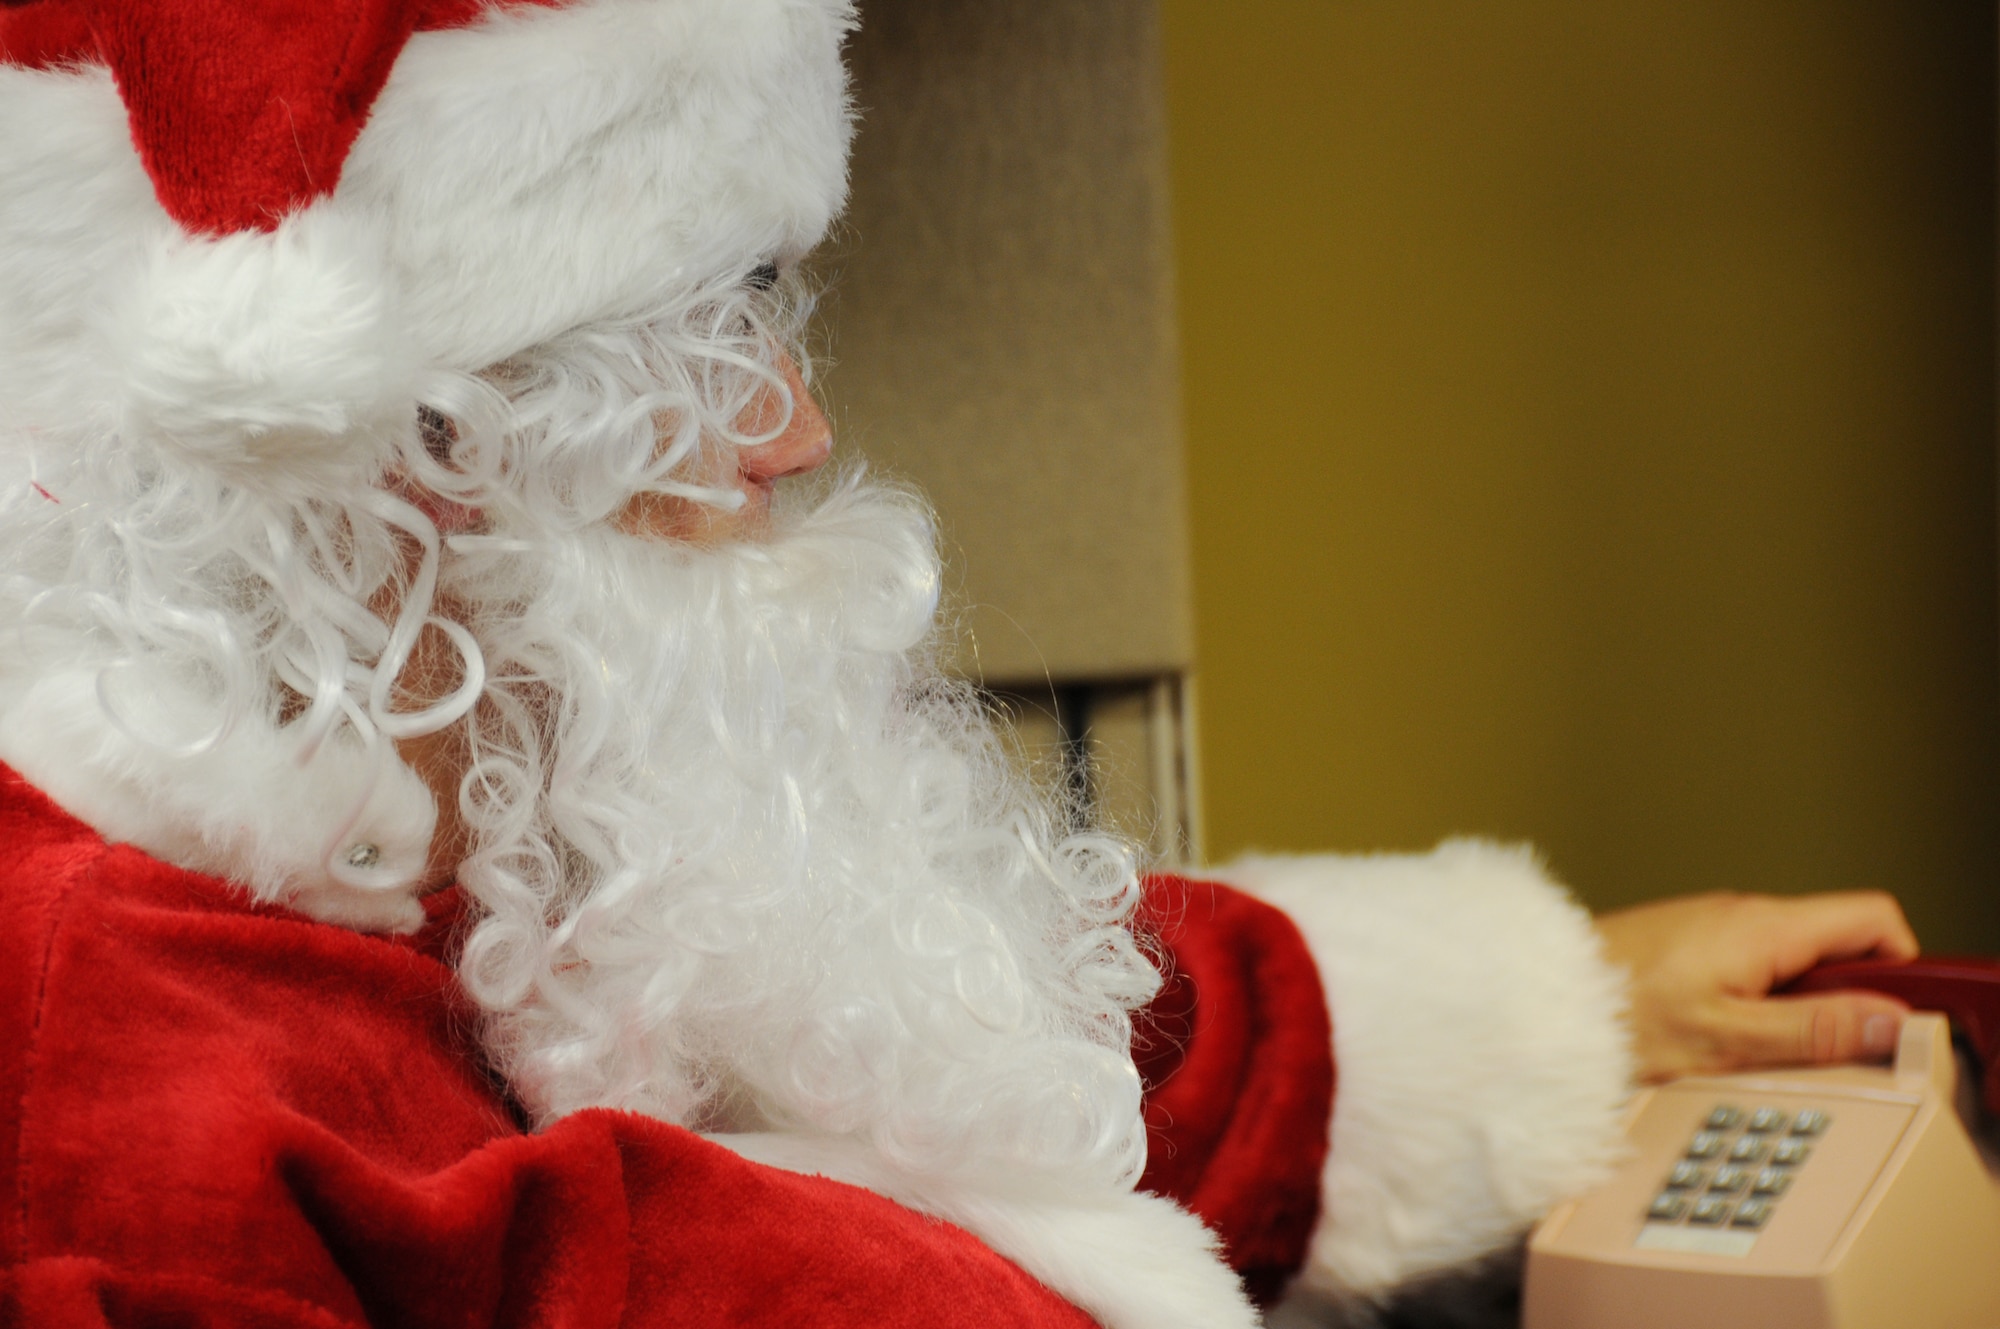 Santa picks up another call on the “Santa Hotline” to talk with boys and girls before he makes his holiday journey.  The “Hotline” will be active Dec. 14-18 from 5 p.m. to 9 p.m.  Children of all ages wishing to call in with last-minute holiday wishes can call 850-882-NOEL (6635).  (Air Force photo/ Samuel King Jr.) 